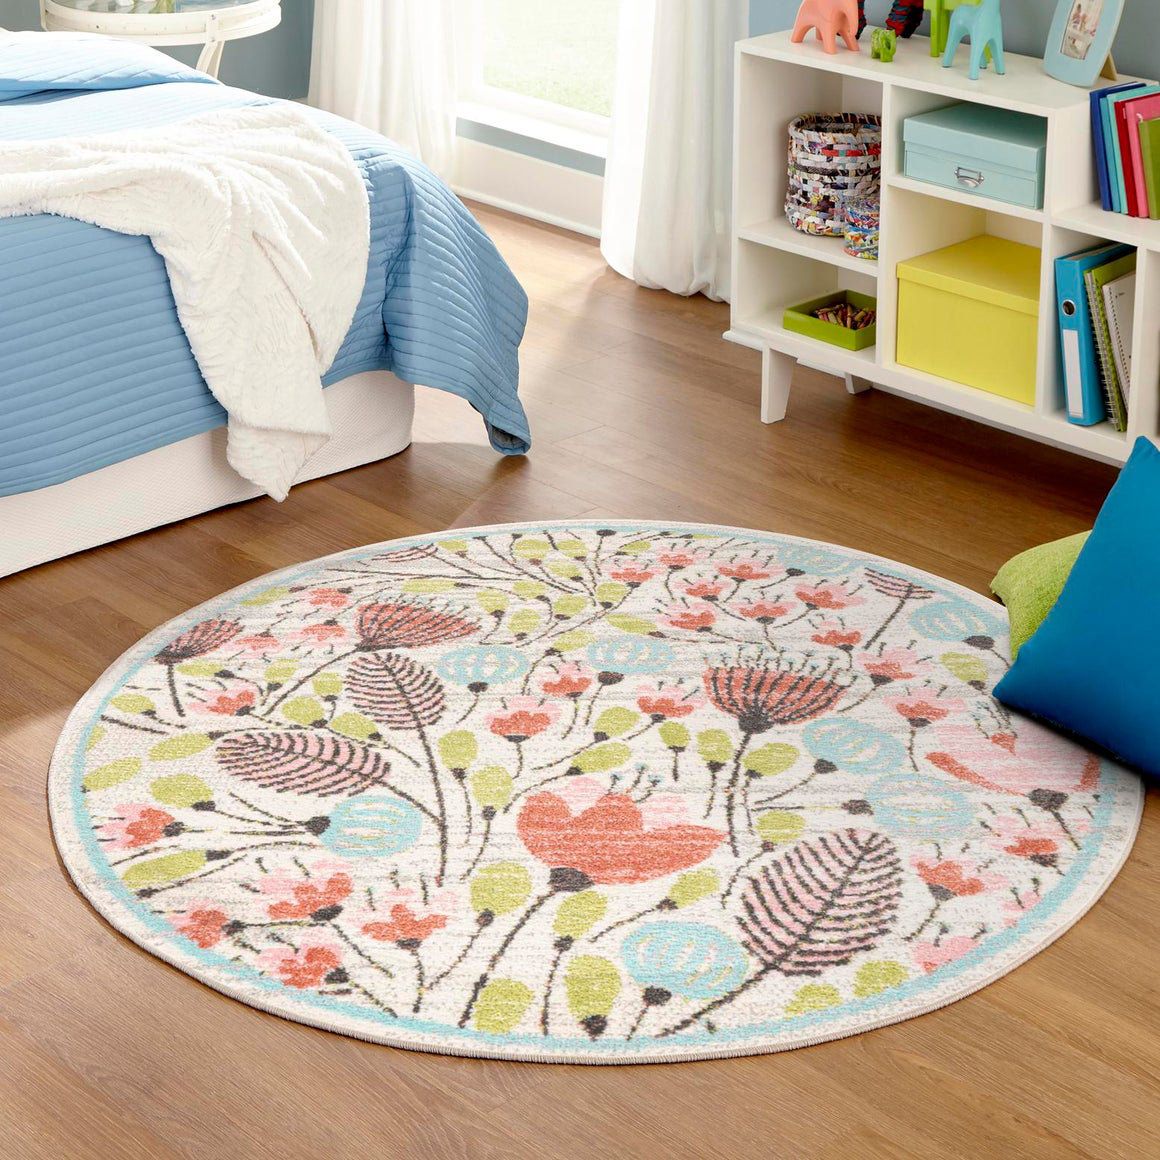 Unique Loom Whimsy Kids Wildflowers Rug & Reviews | Wayfair For Pink Whimsy Kids Round Rugs (View 4 of 15)